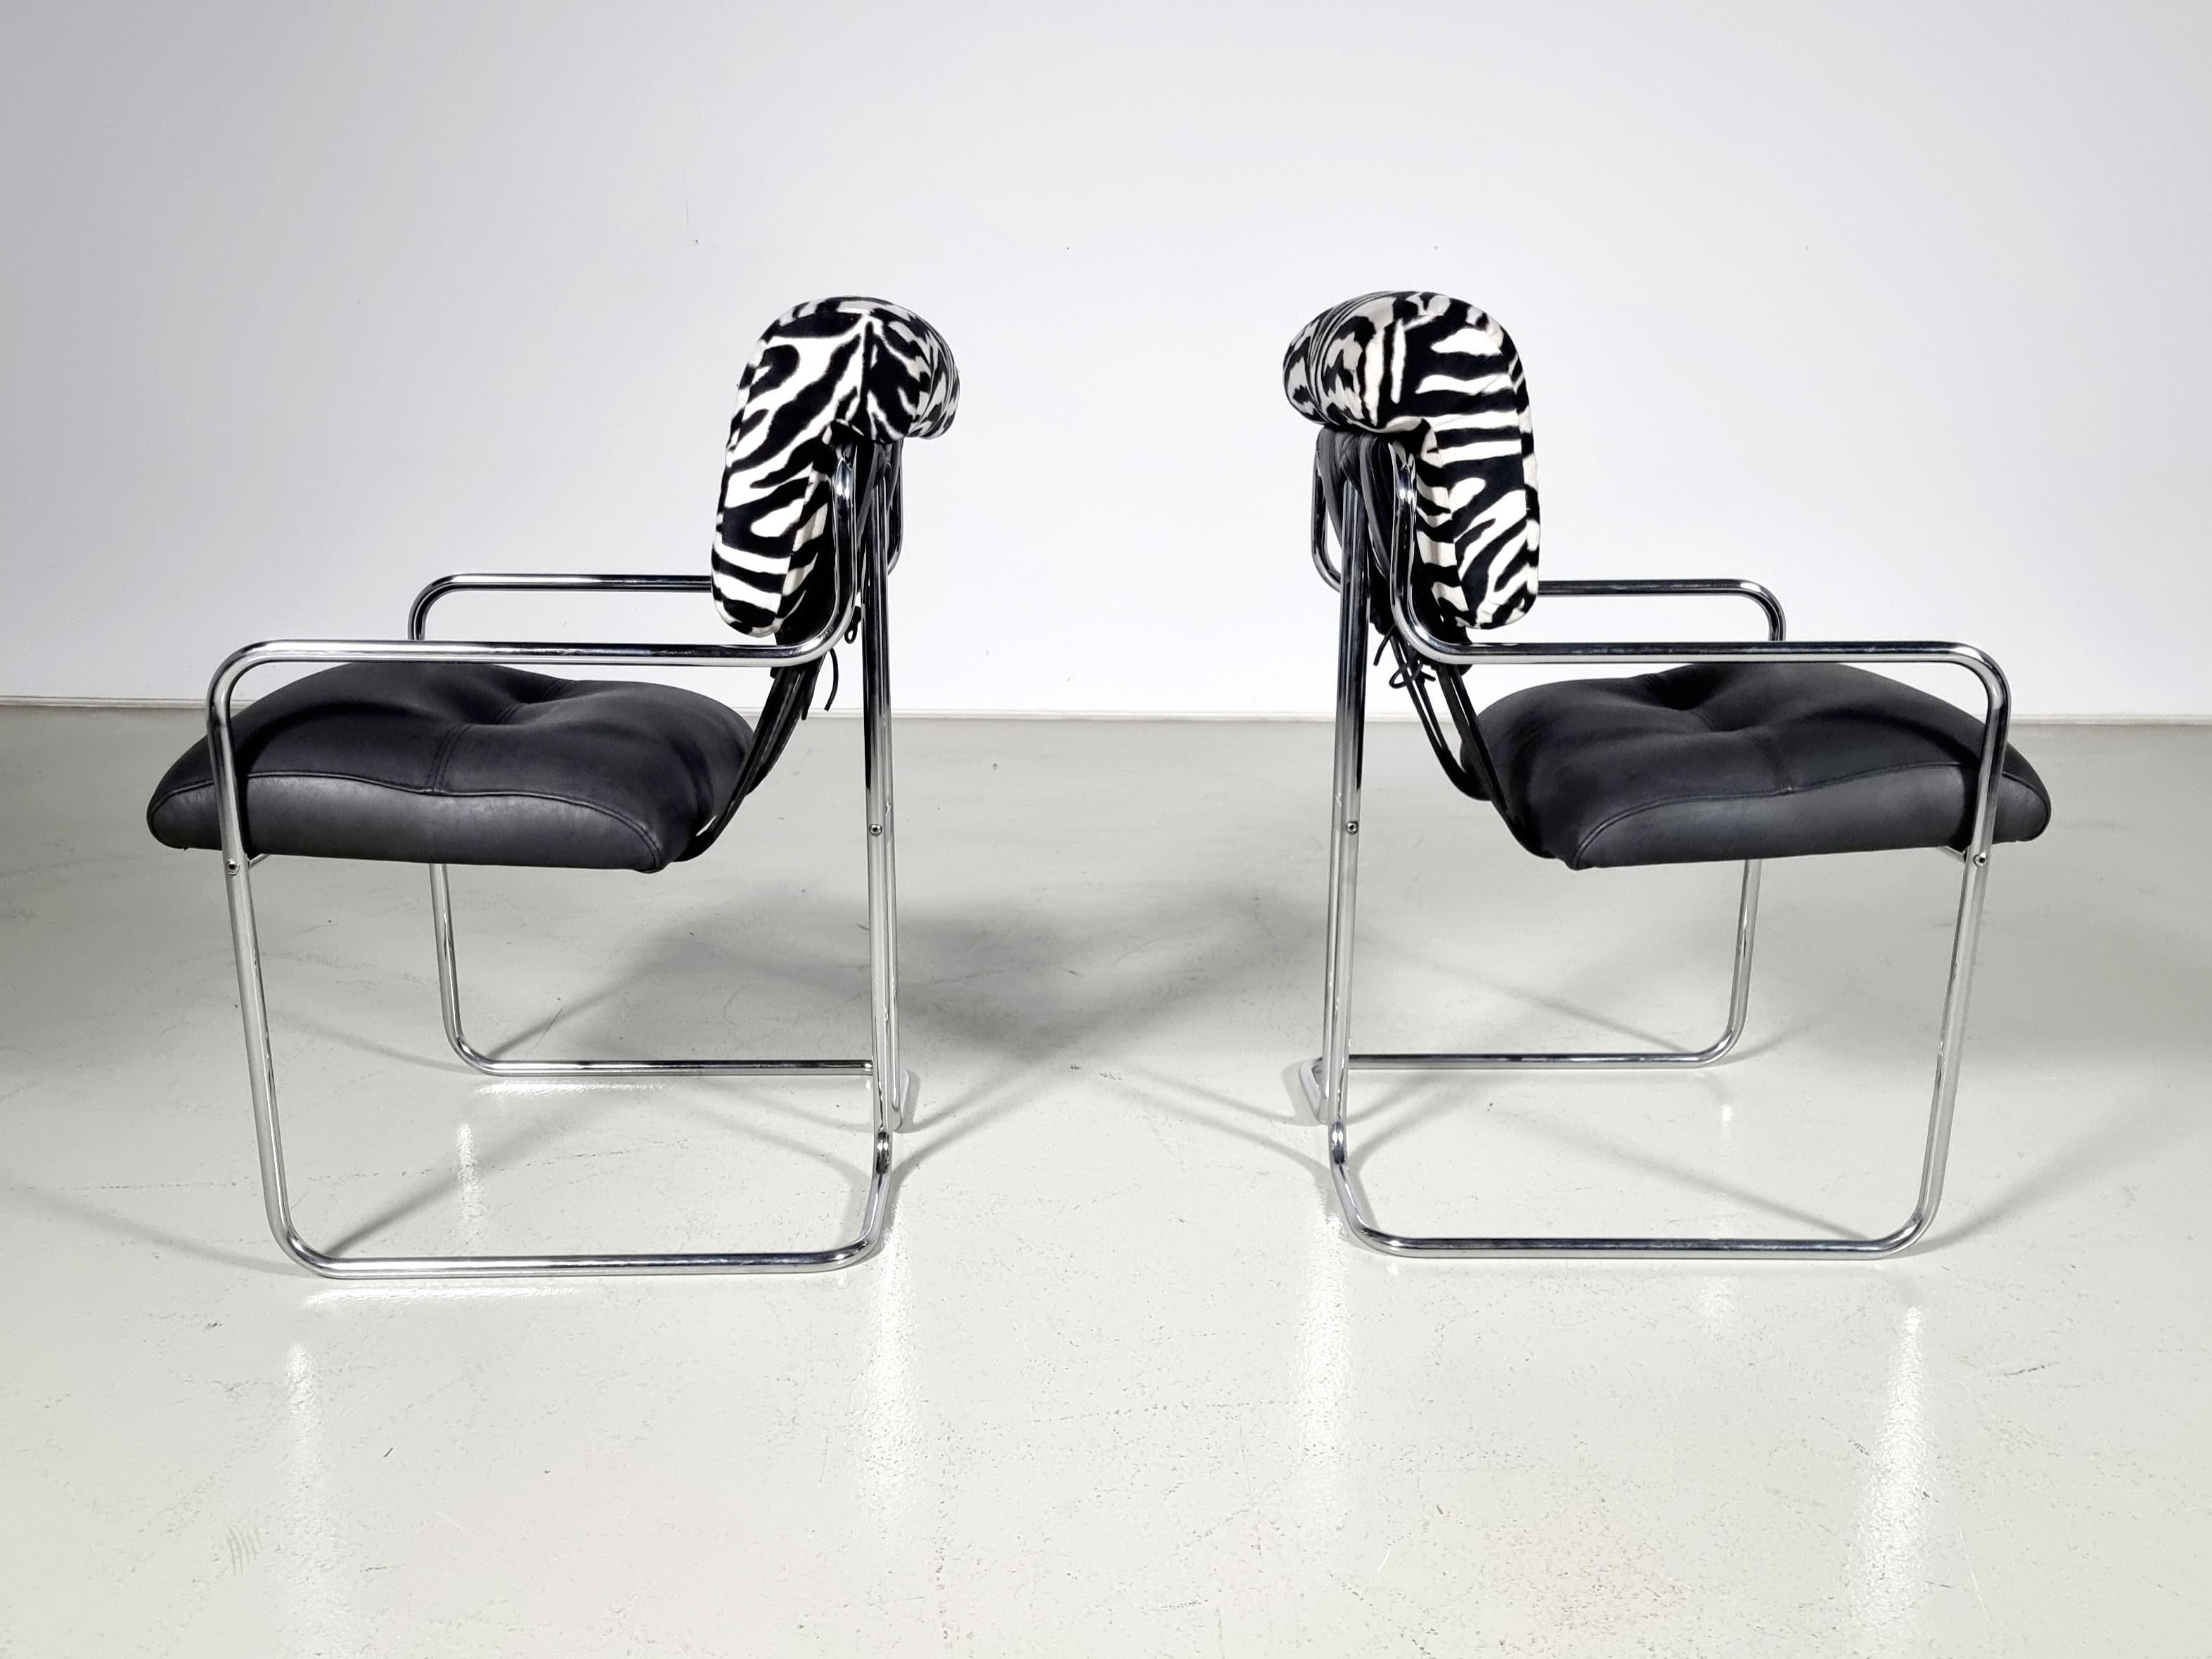 Tucroma Chairs in black leather and zebra fabric, Guido Faleschini, Mariani In Good Condition For Sale In amstelveen, NL